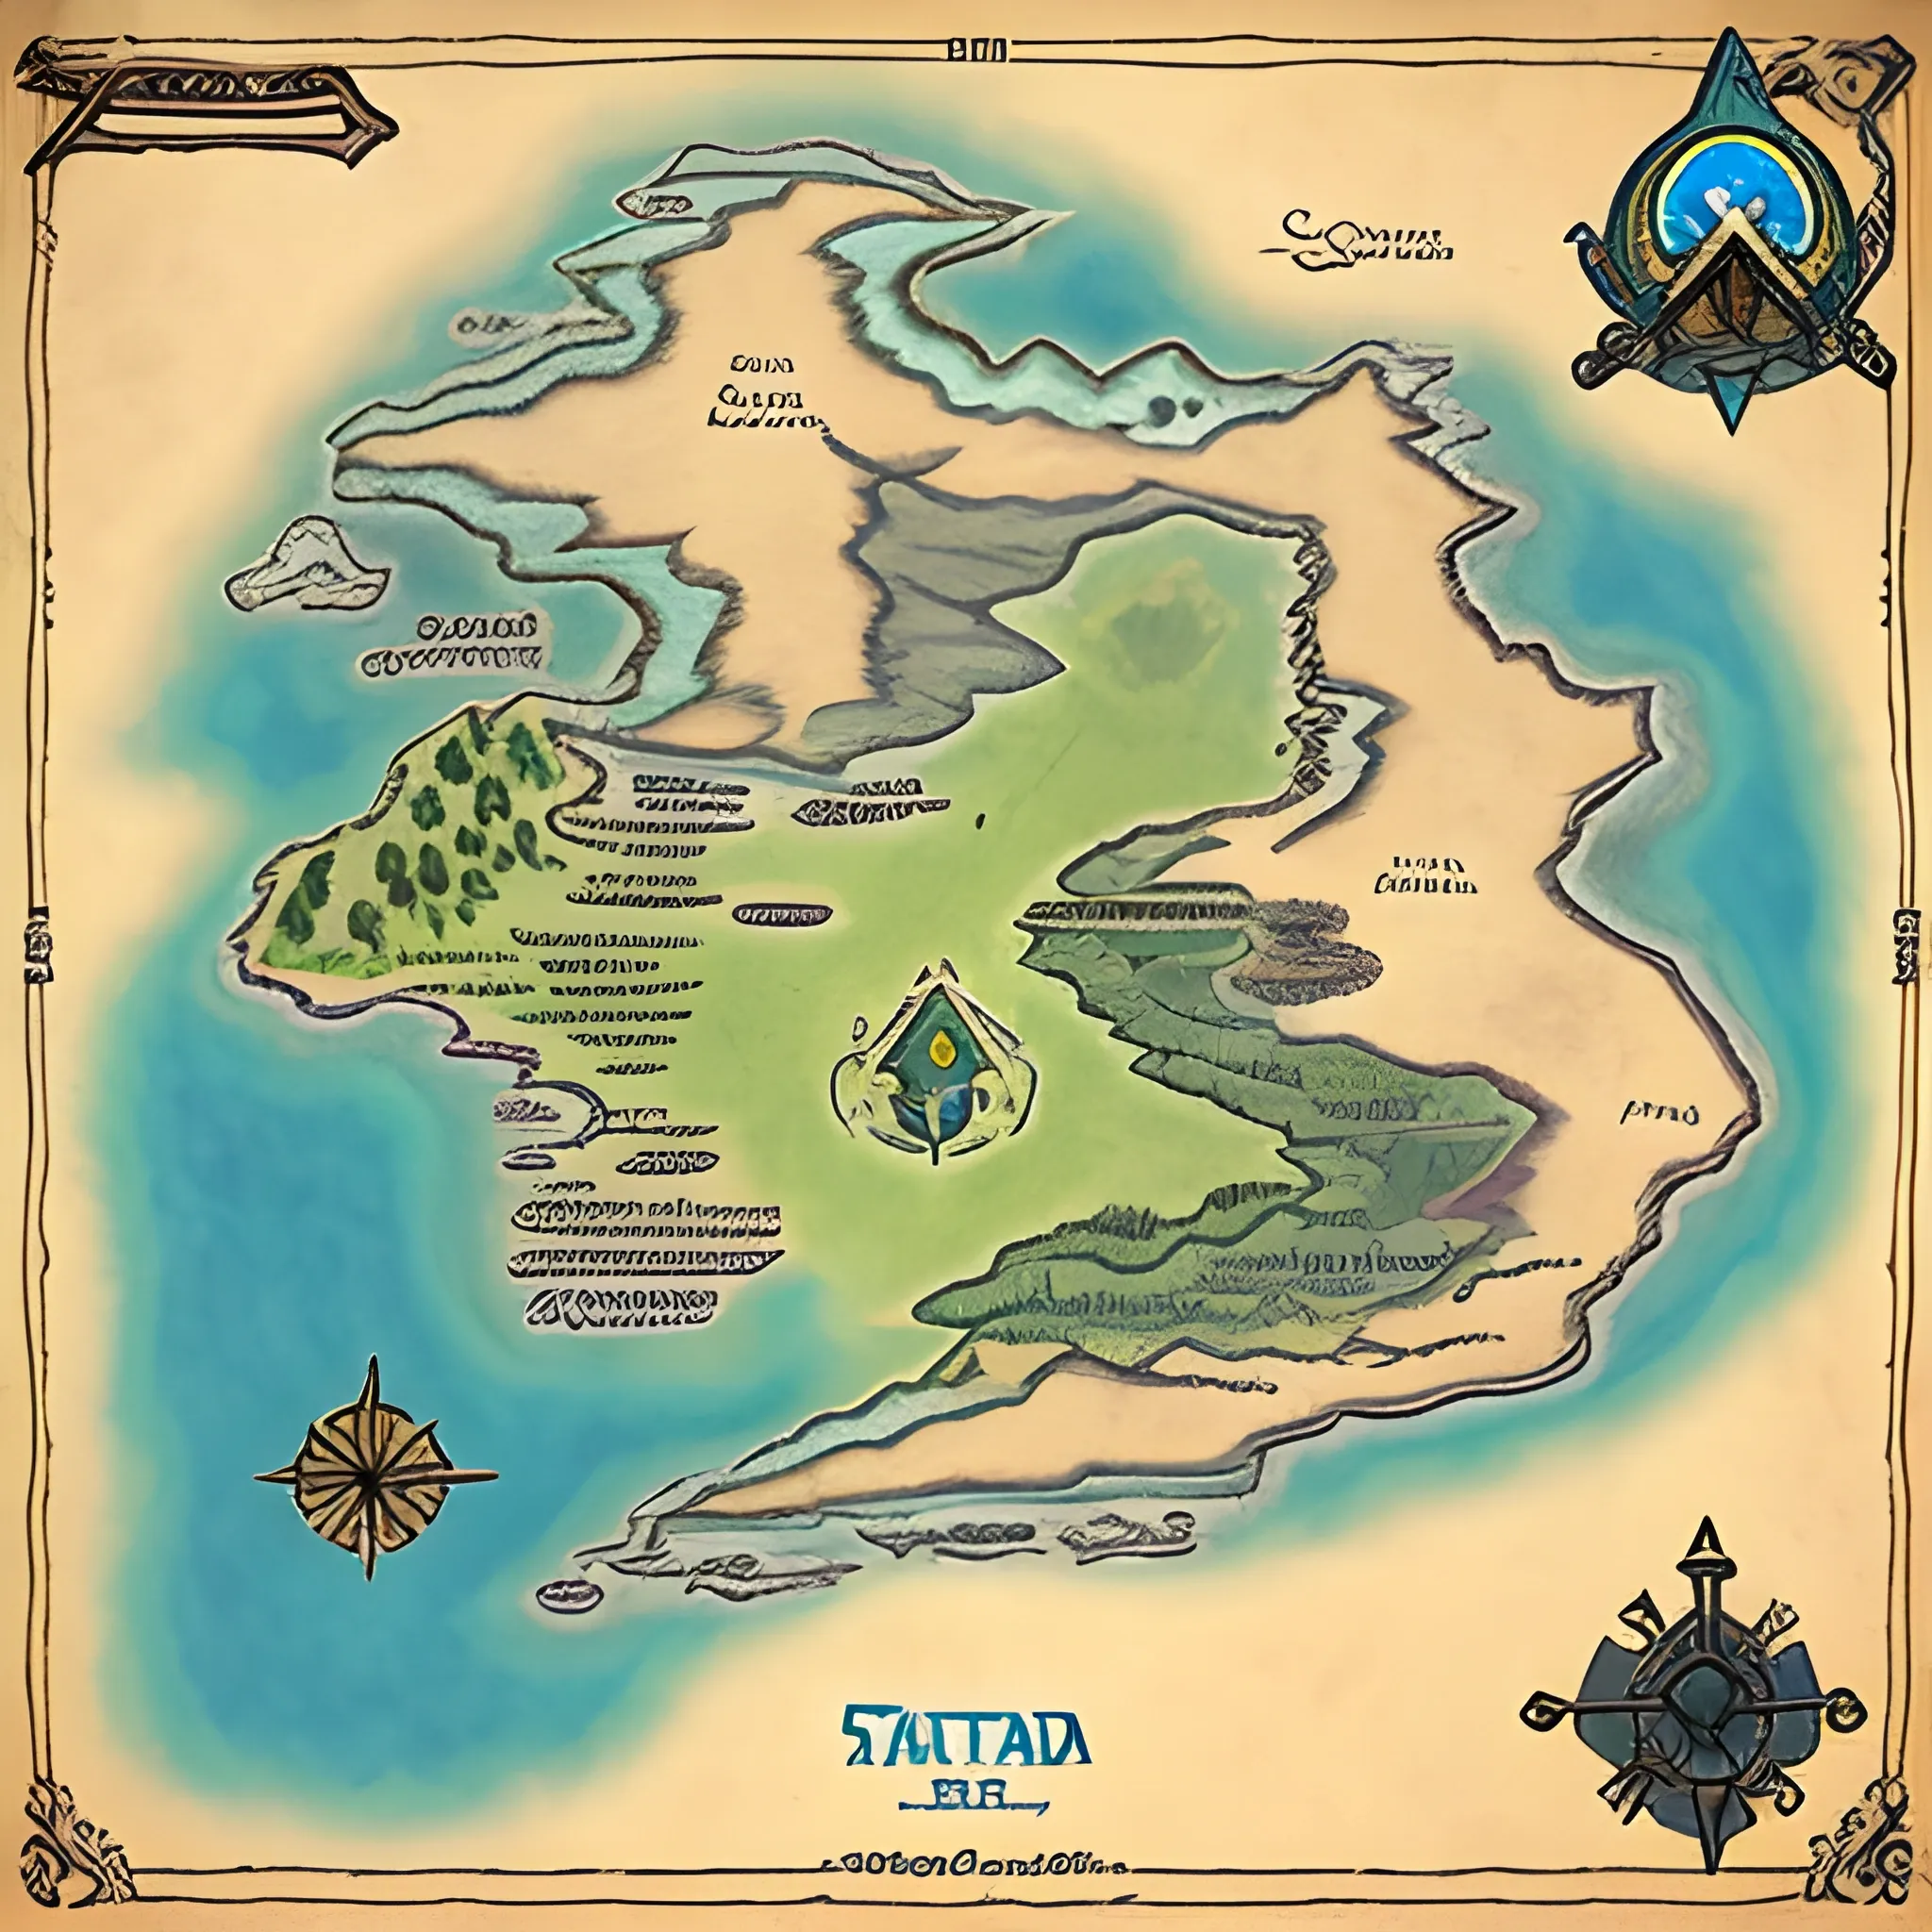 breath of the wild style map of a fantasy continent.